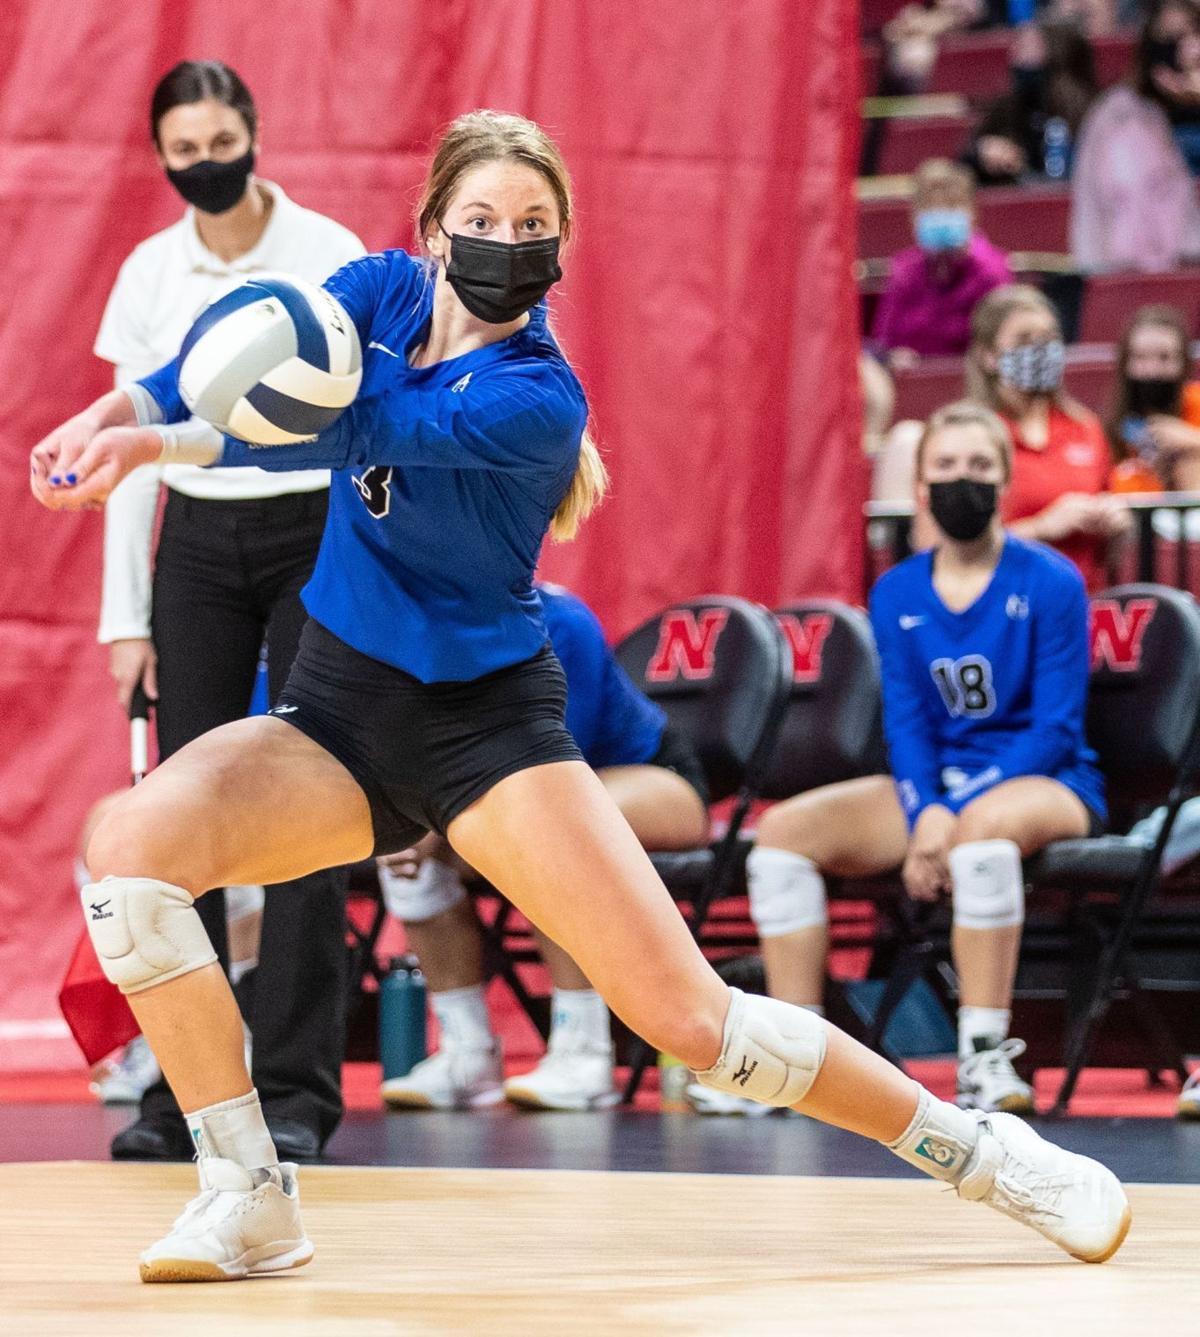 Six teams crowned champions at Nebraska high school state volleyball